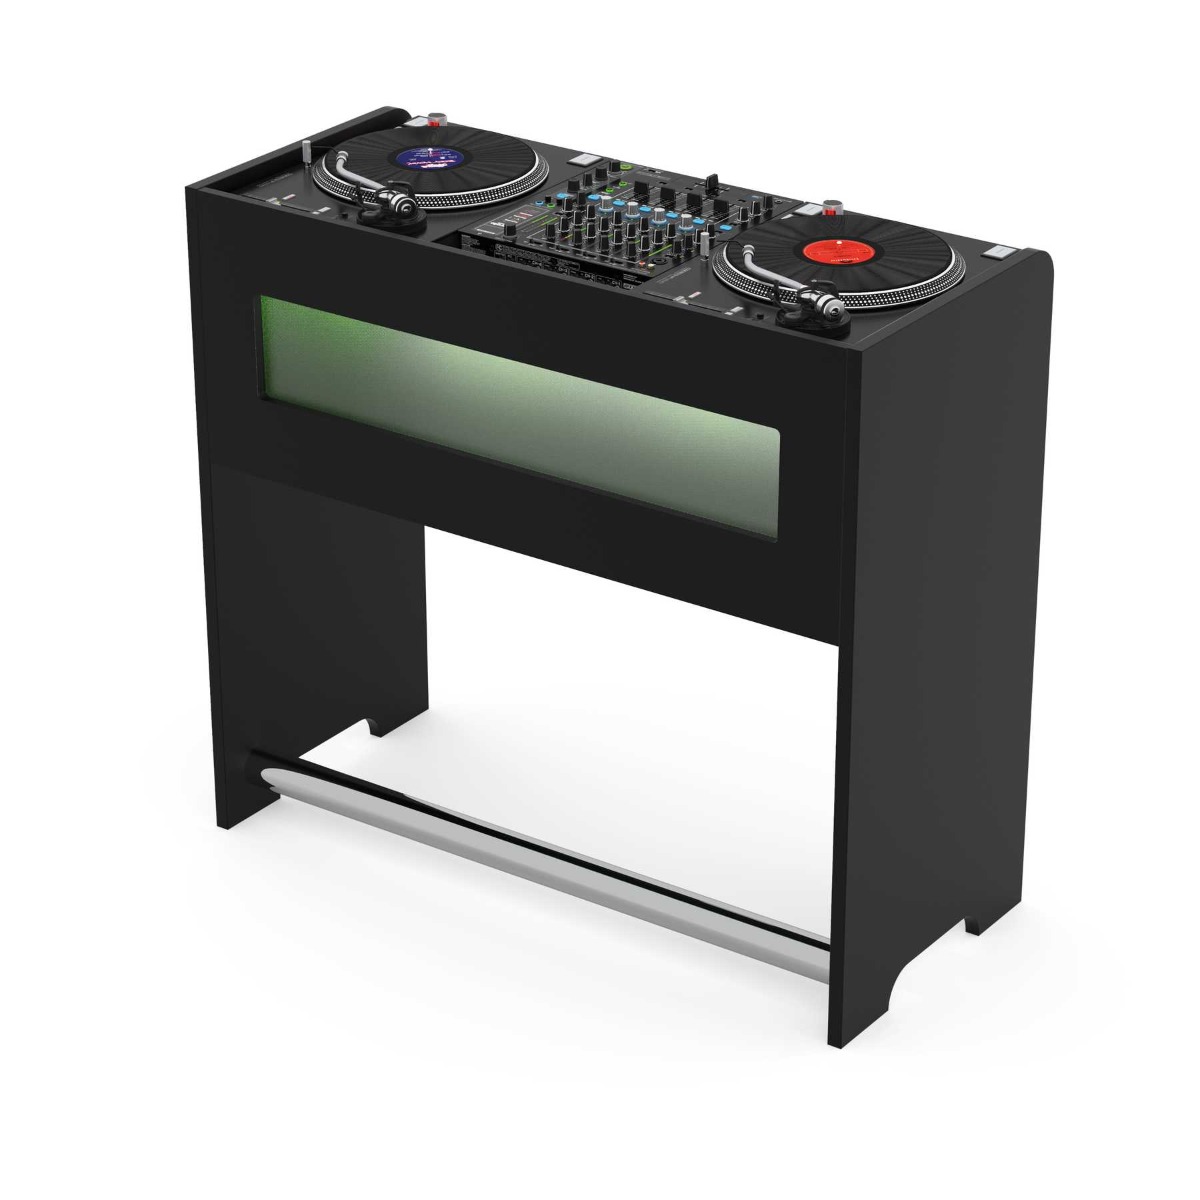 Glorious GigBar black / Furniture for DJs, Producers and Vinyl Lovers